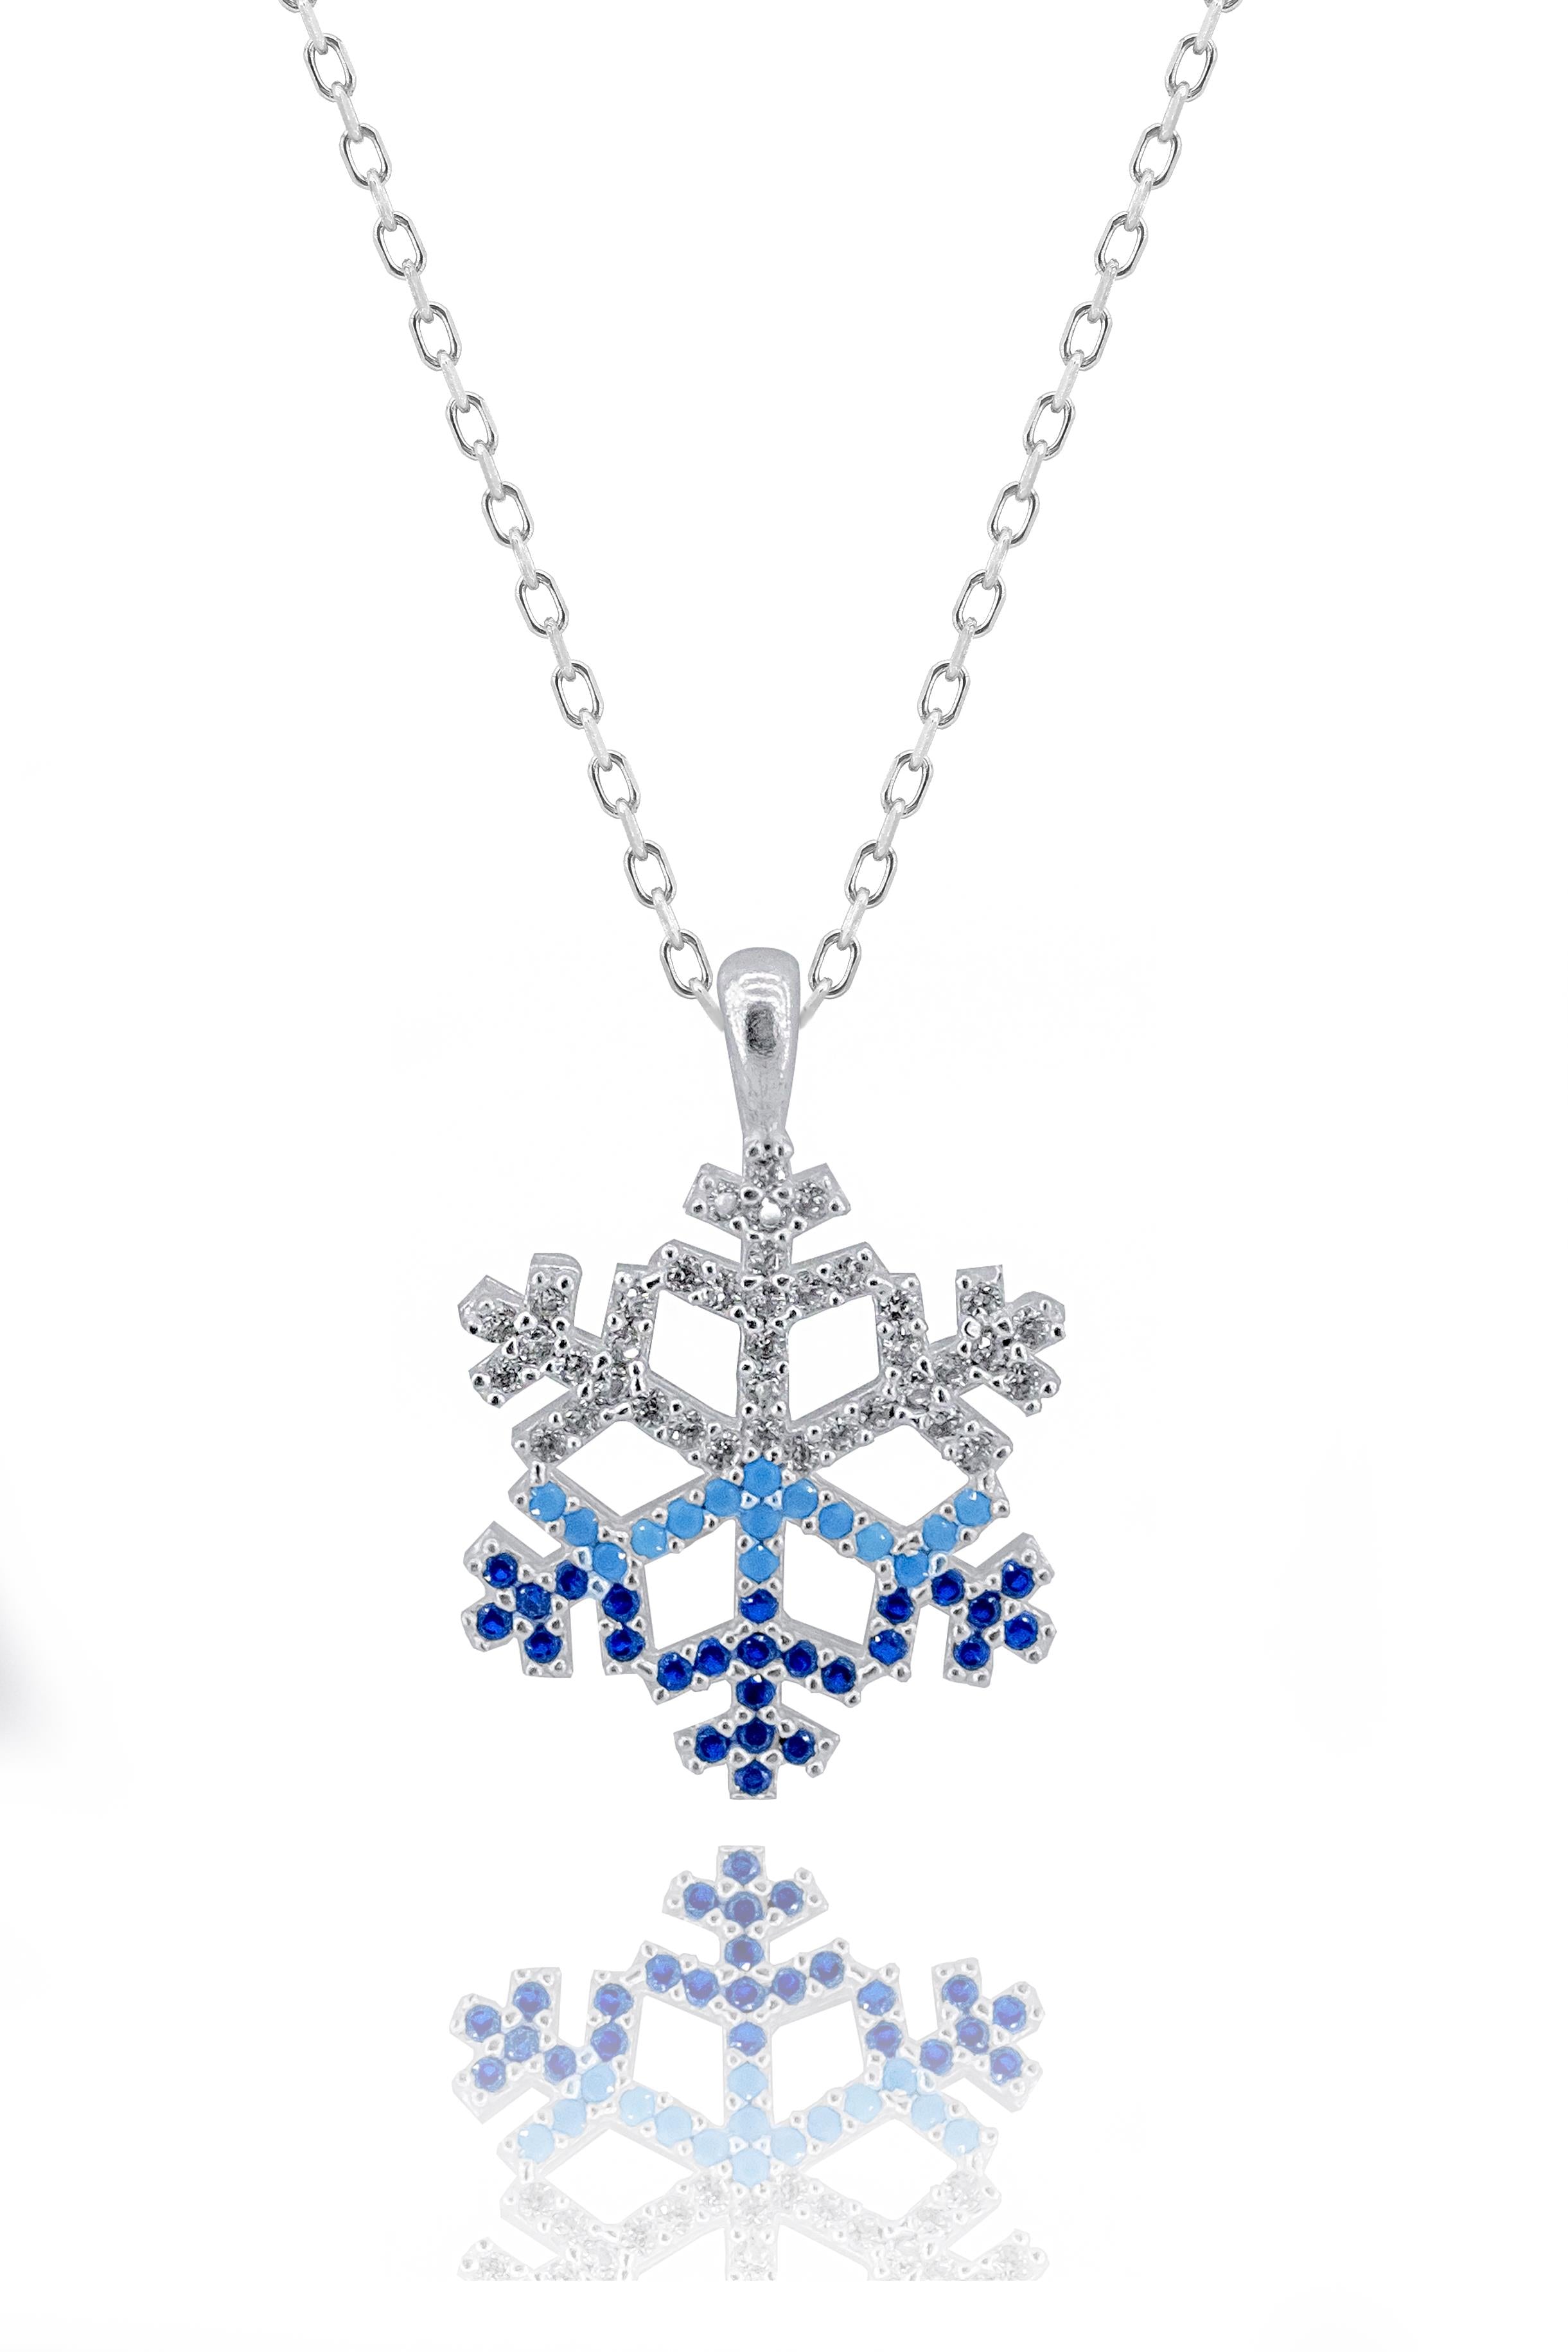 Iridescent Blue and White Transition Snowflake Necklace with Gemstones - 925 Sterling Silver Chain